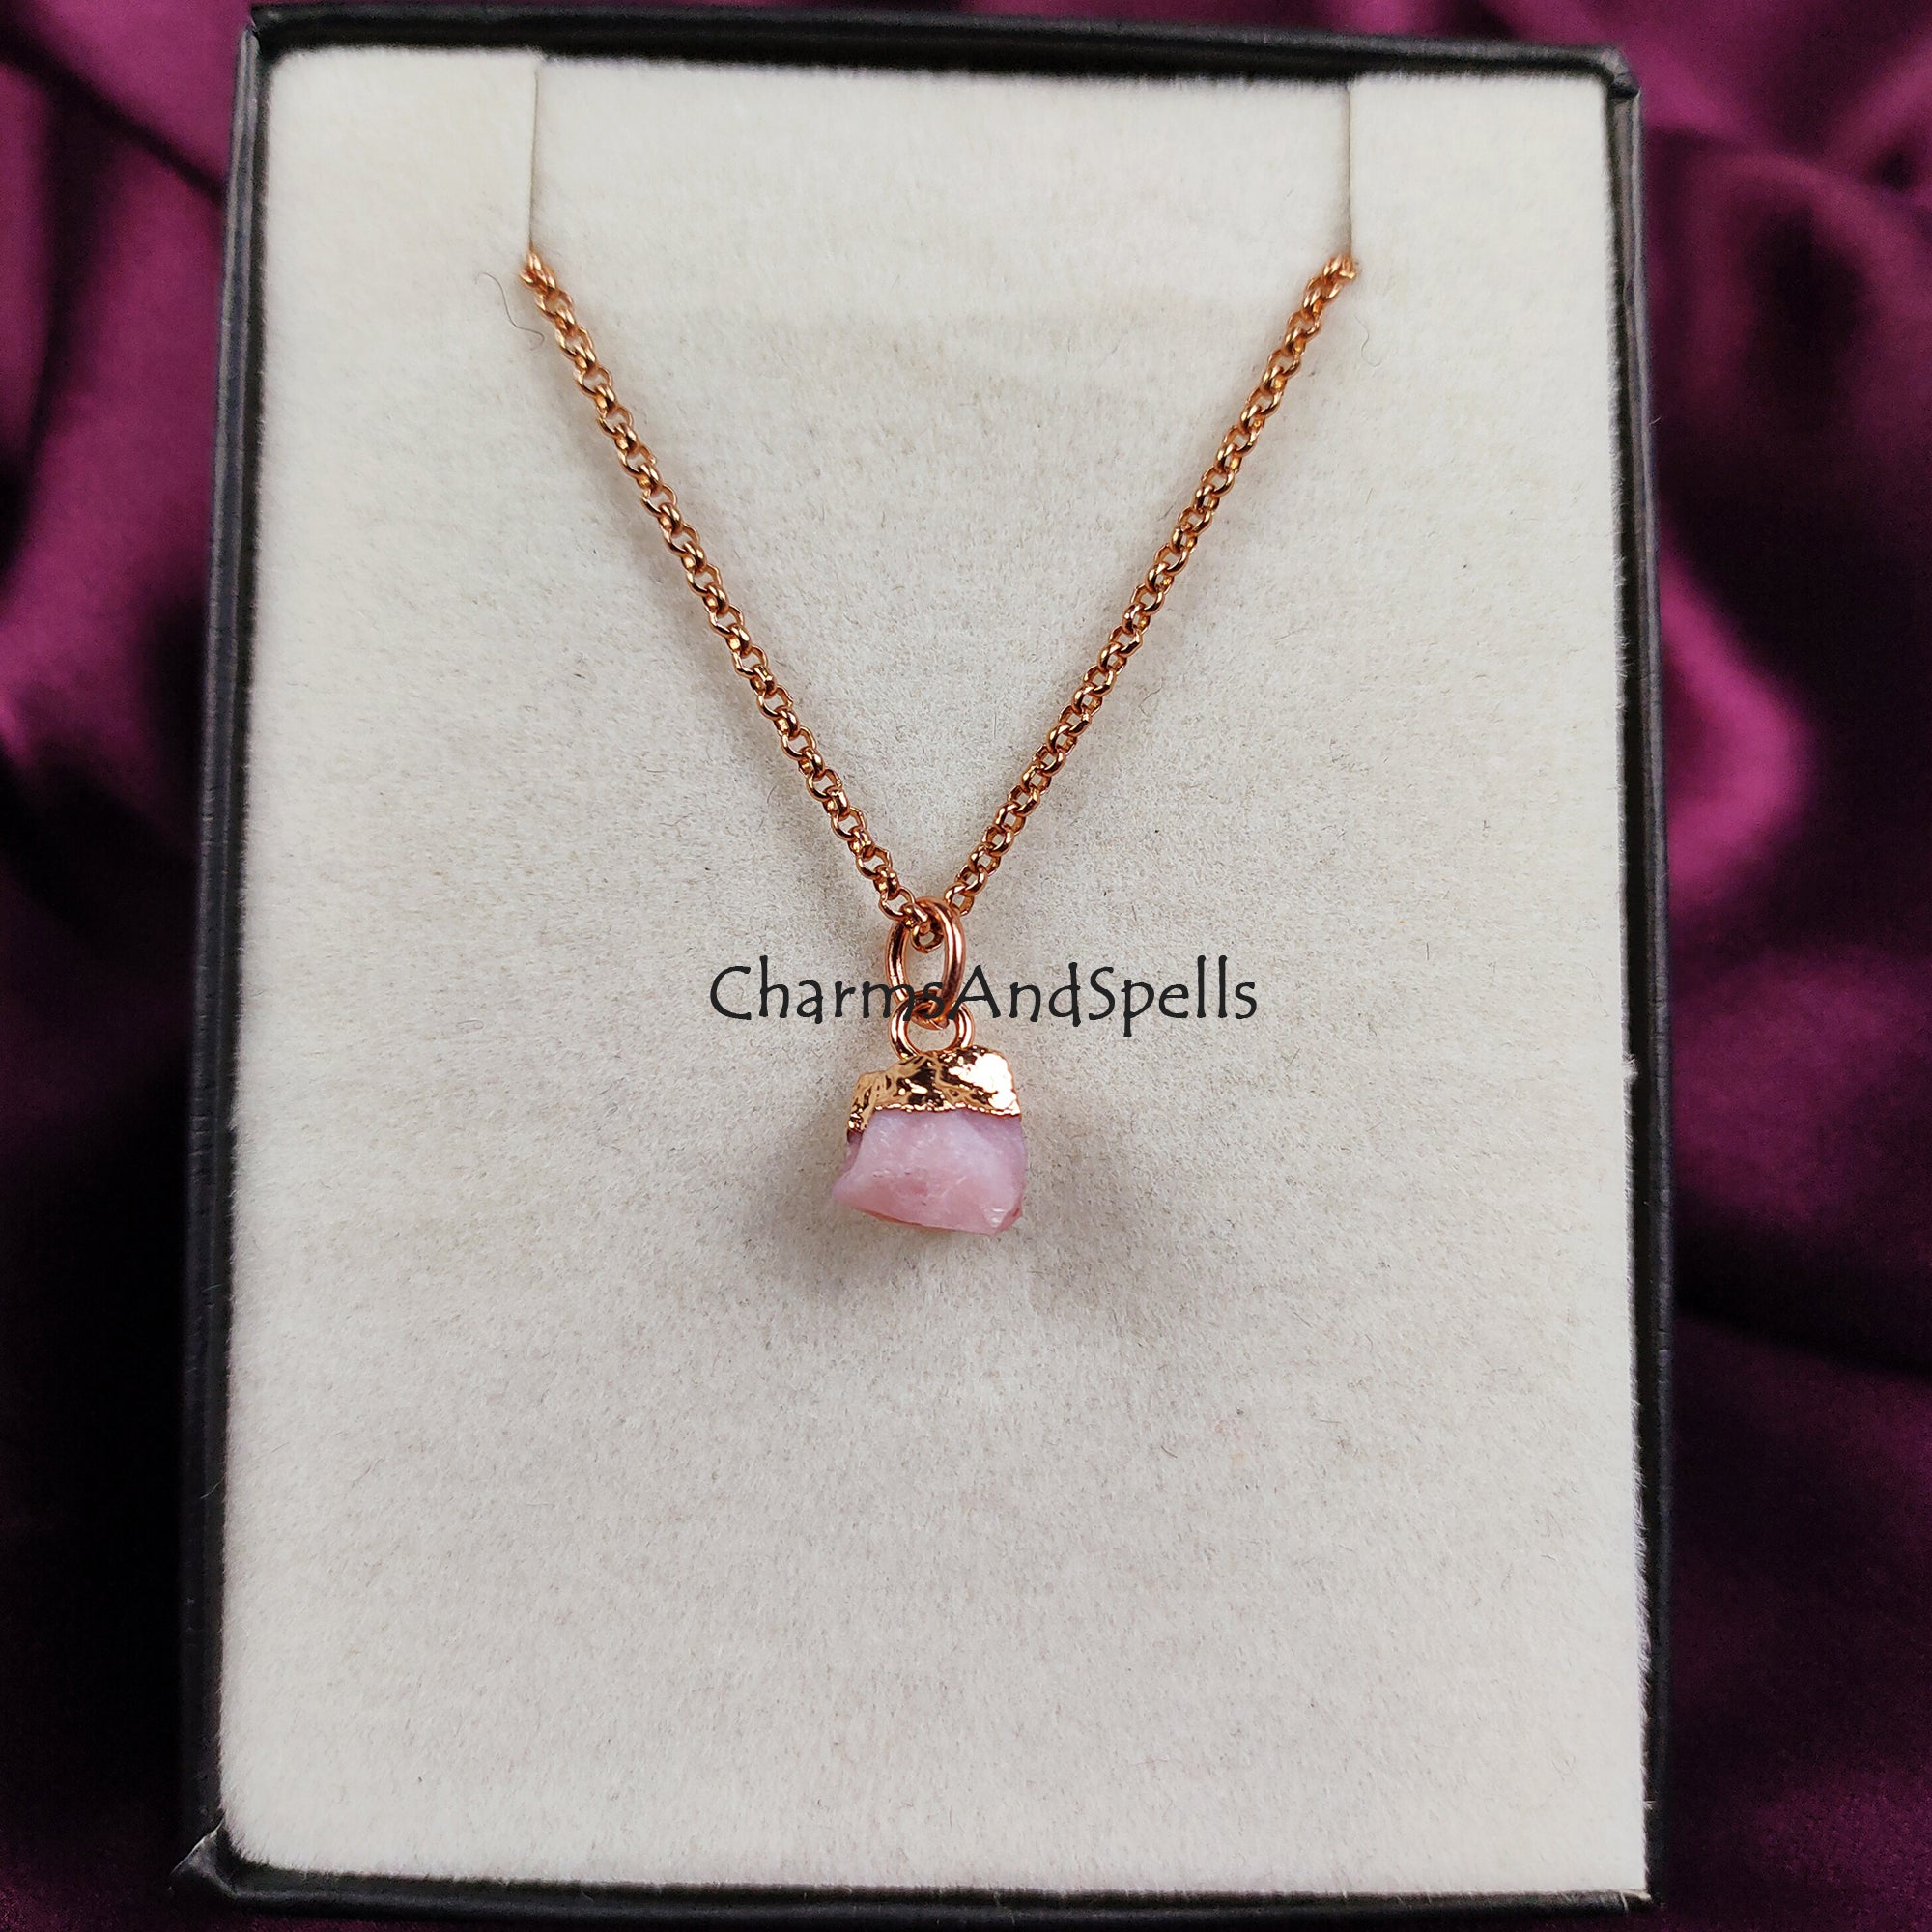 Raw Pink Opal Necklace, Birthstone Necklace, Gemstone Necklace, Crystal Healing Stones, October Birthstone, Birthday Gift, Bridesmaid Gift